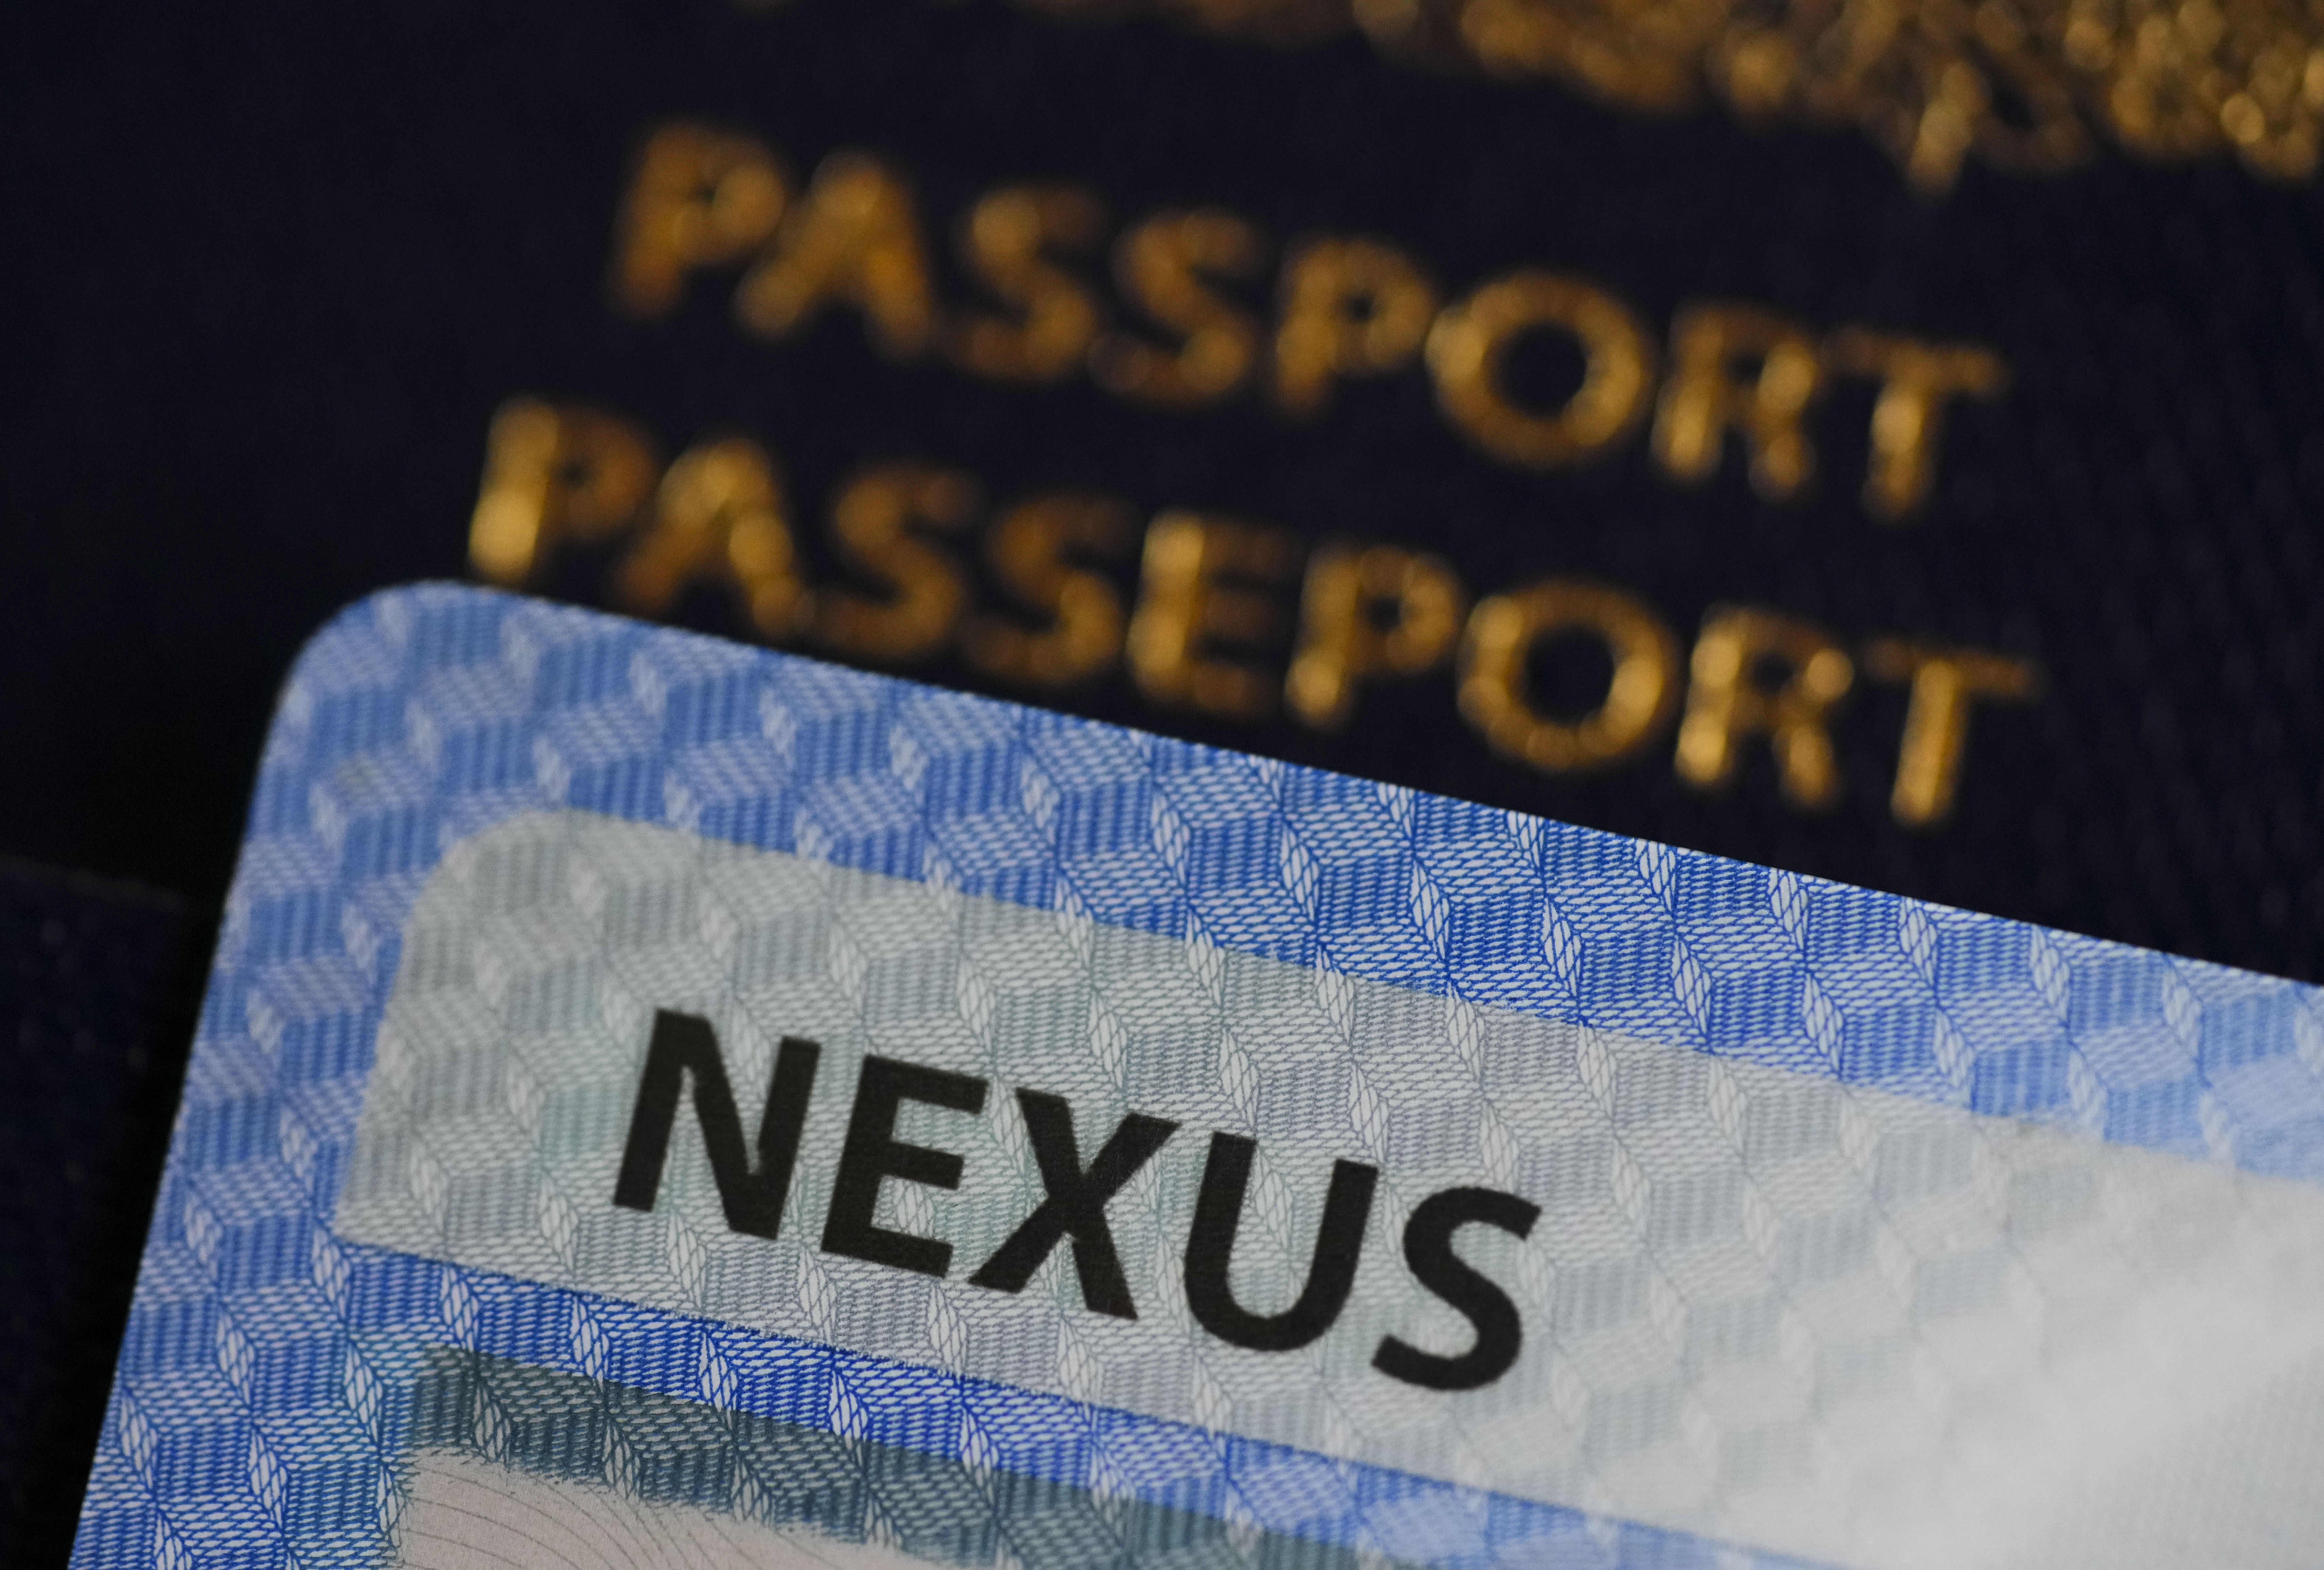 A NEXUS card and a Canadian passport are pictured in Ottawa on Tuesday, Jan. 17, 2023. THE CANADIAN PRESS/Sean Kilpatrick